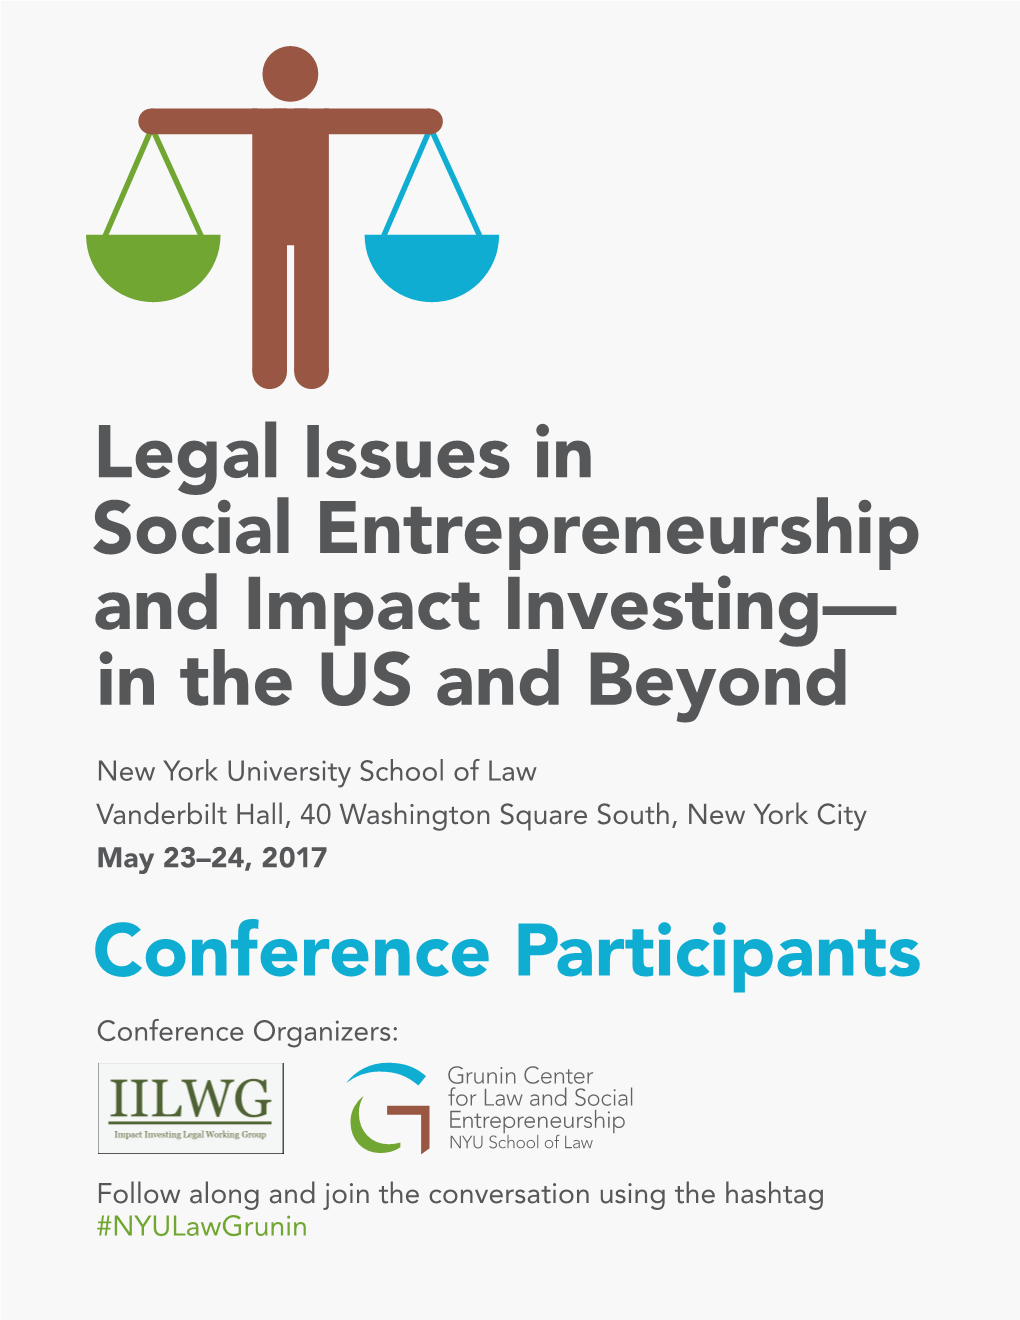 Legal Issues in Social Entrepreneurship and Impact Investing— in the US and Beyond Conference Participants